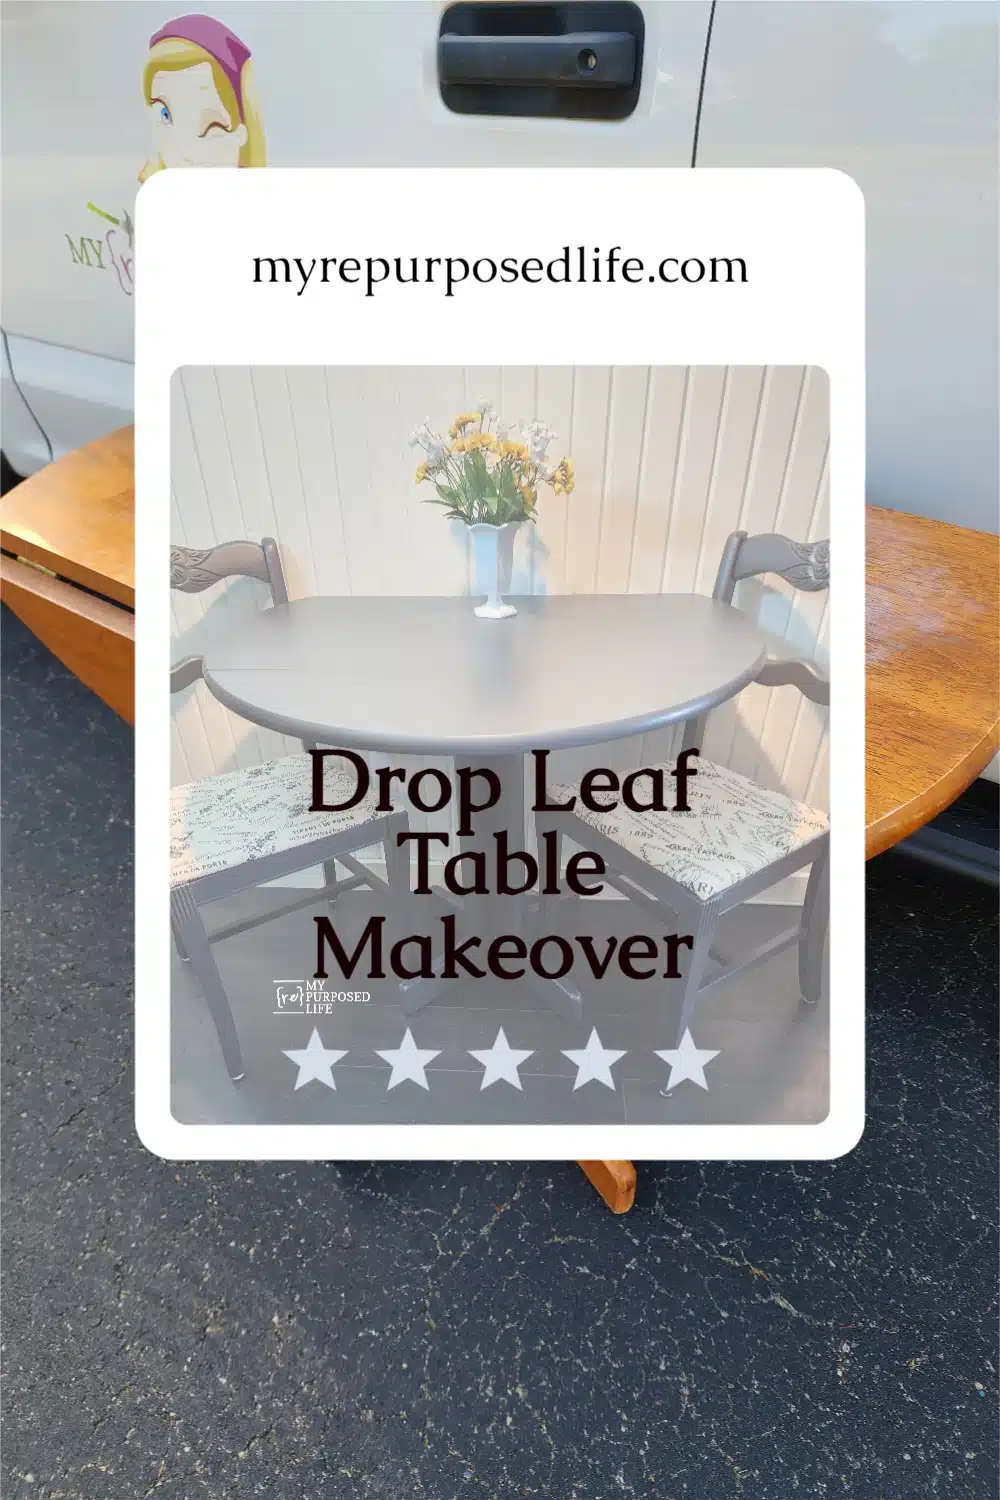 How to paint a pedestal drop leaf table from the thrift store. There is an order to follow. Tips for a successful project! #MyRepurposedLife #upcycle #thriftstore via @repurposedlife